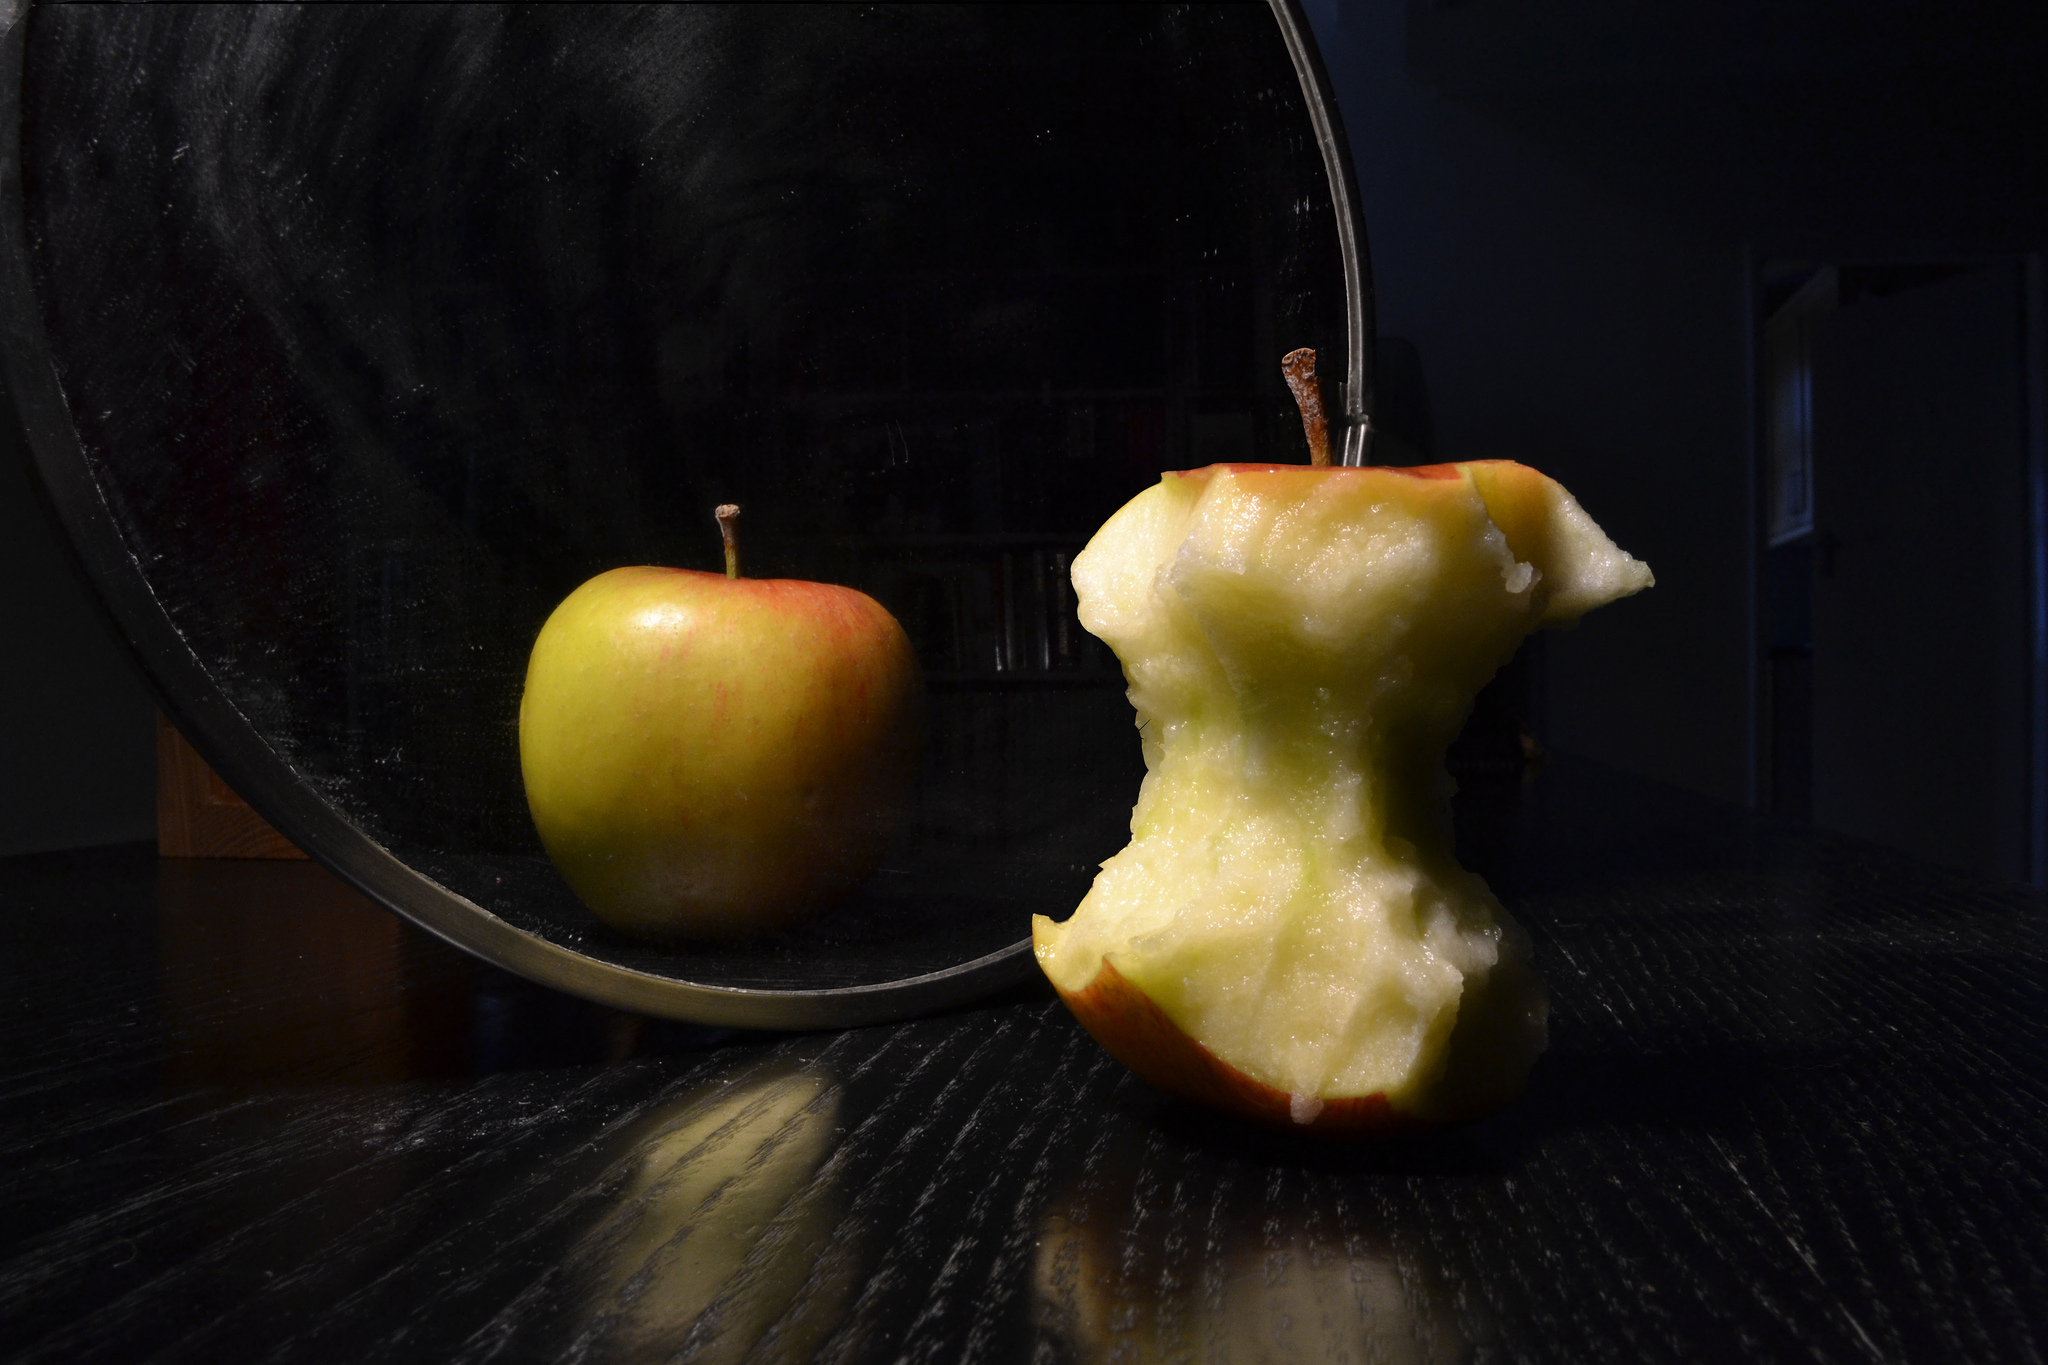 Apple in the mirror. The apple is whole but the reflection is eaten.